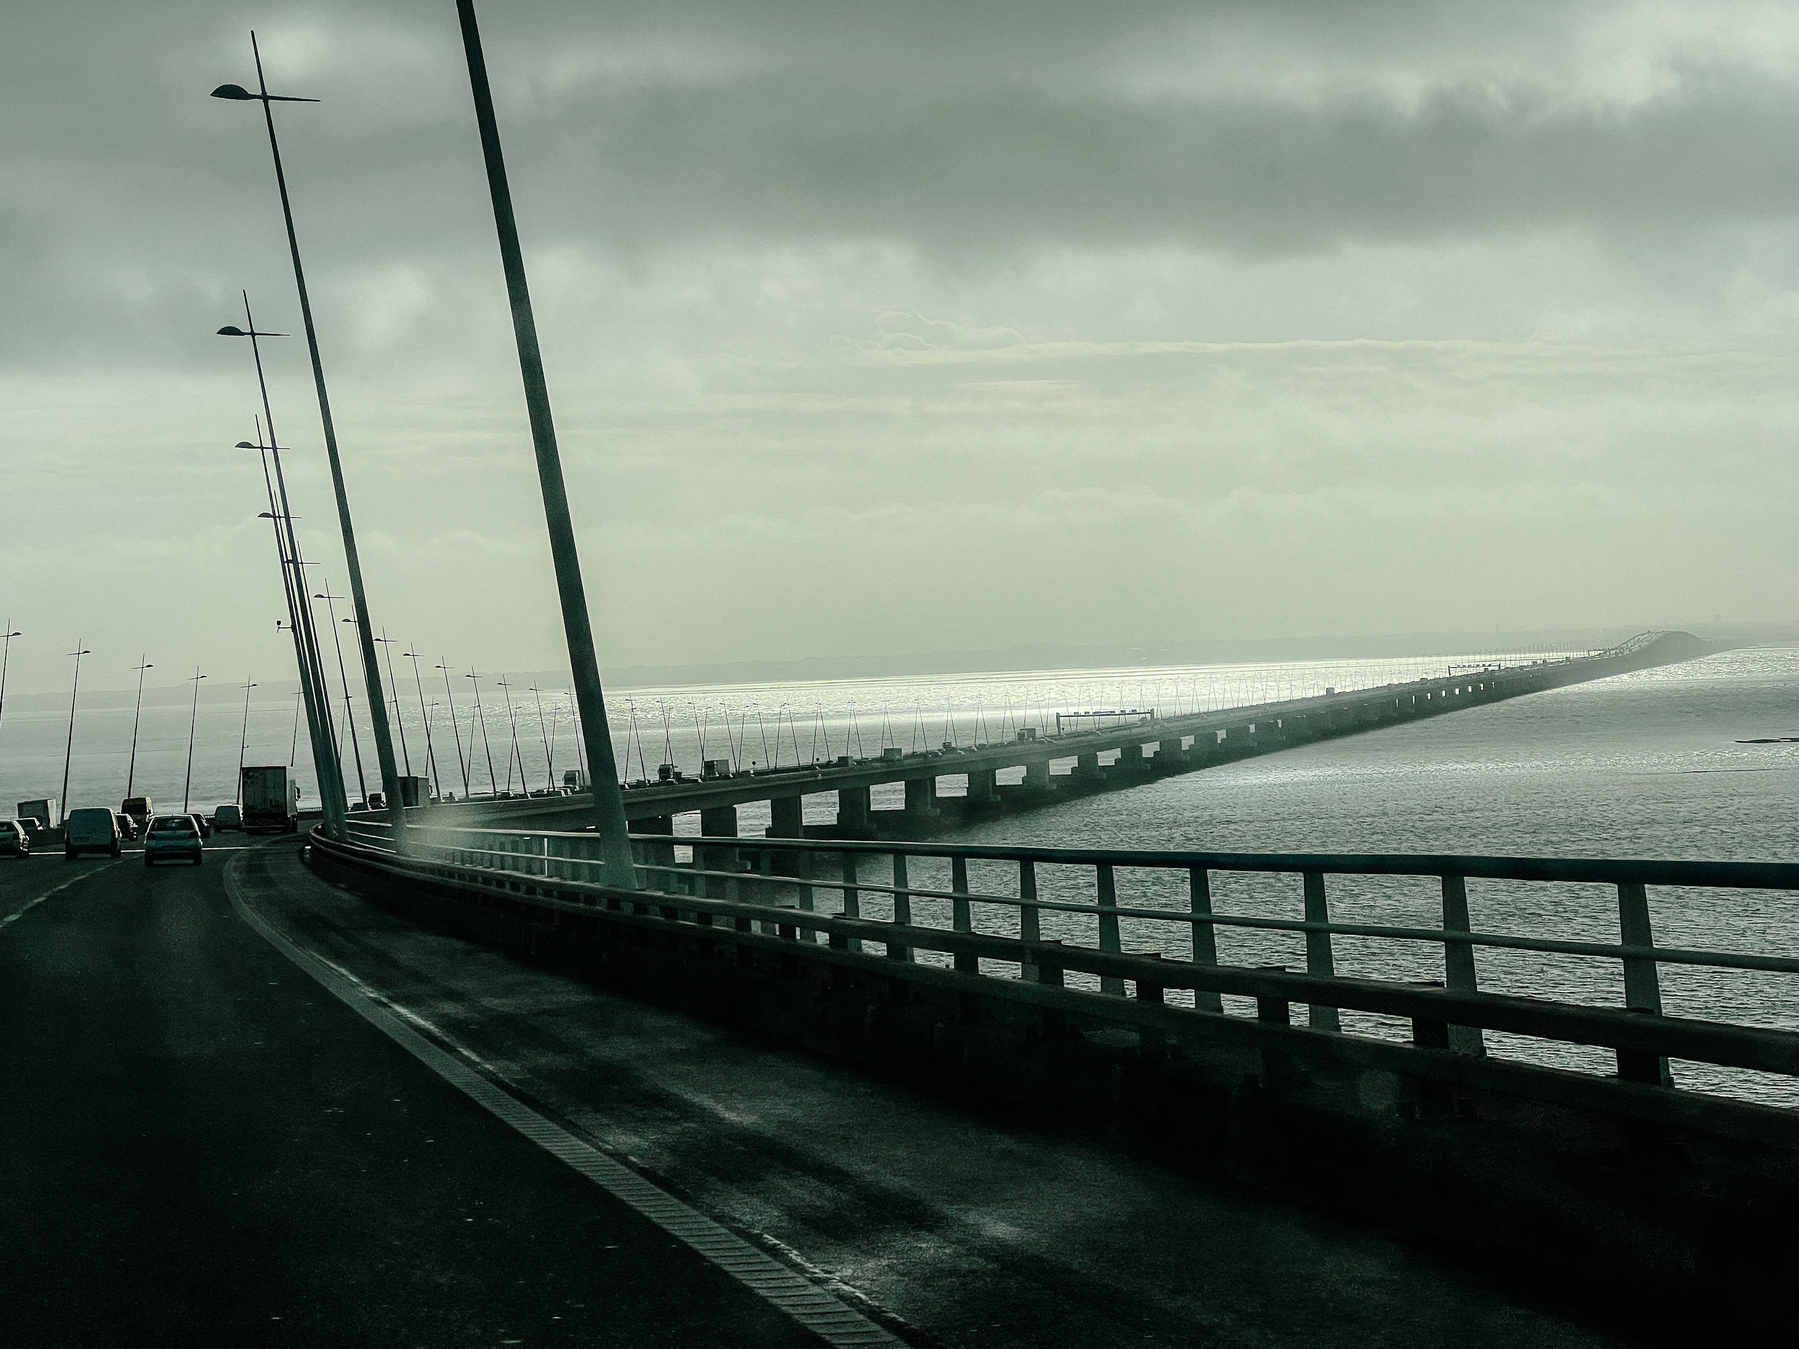 Driving on a very long bridge, we can see the wide river in front of us, and a stormy sky